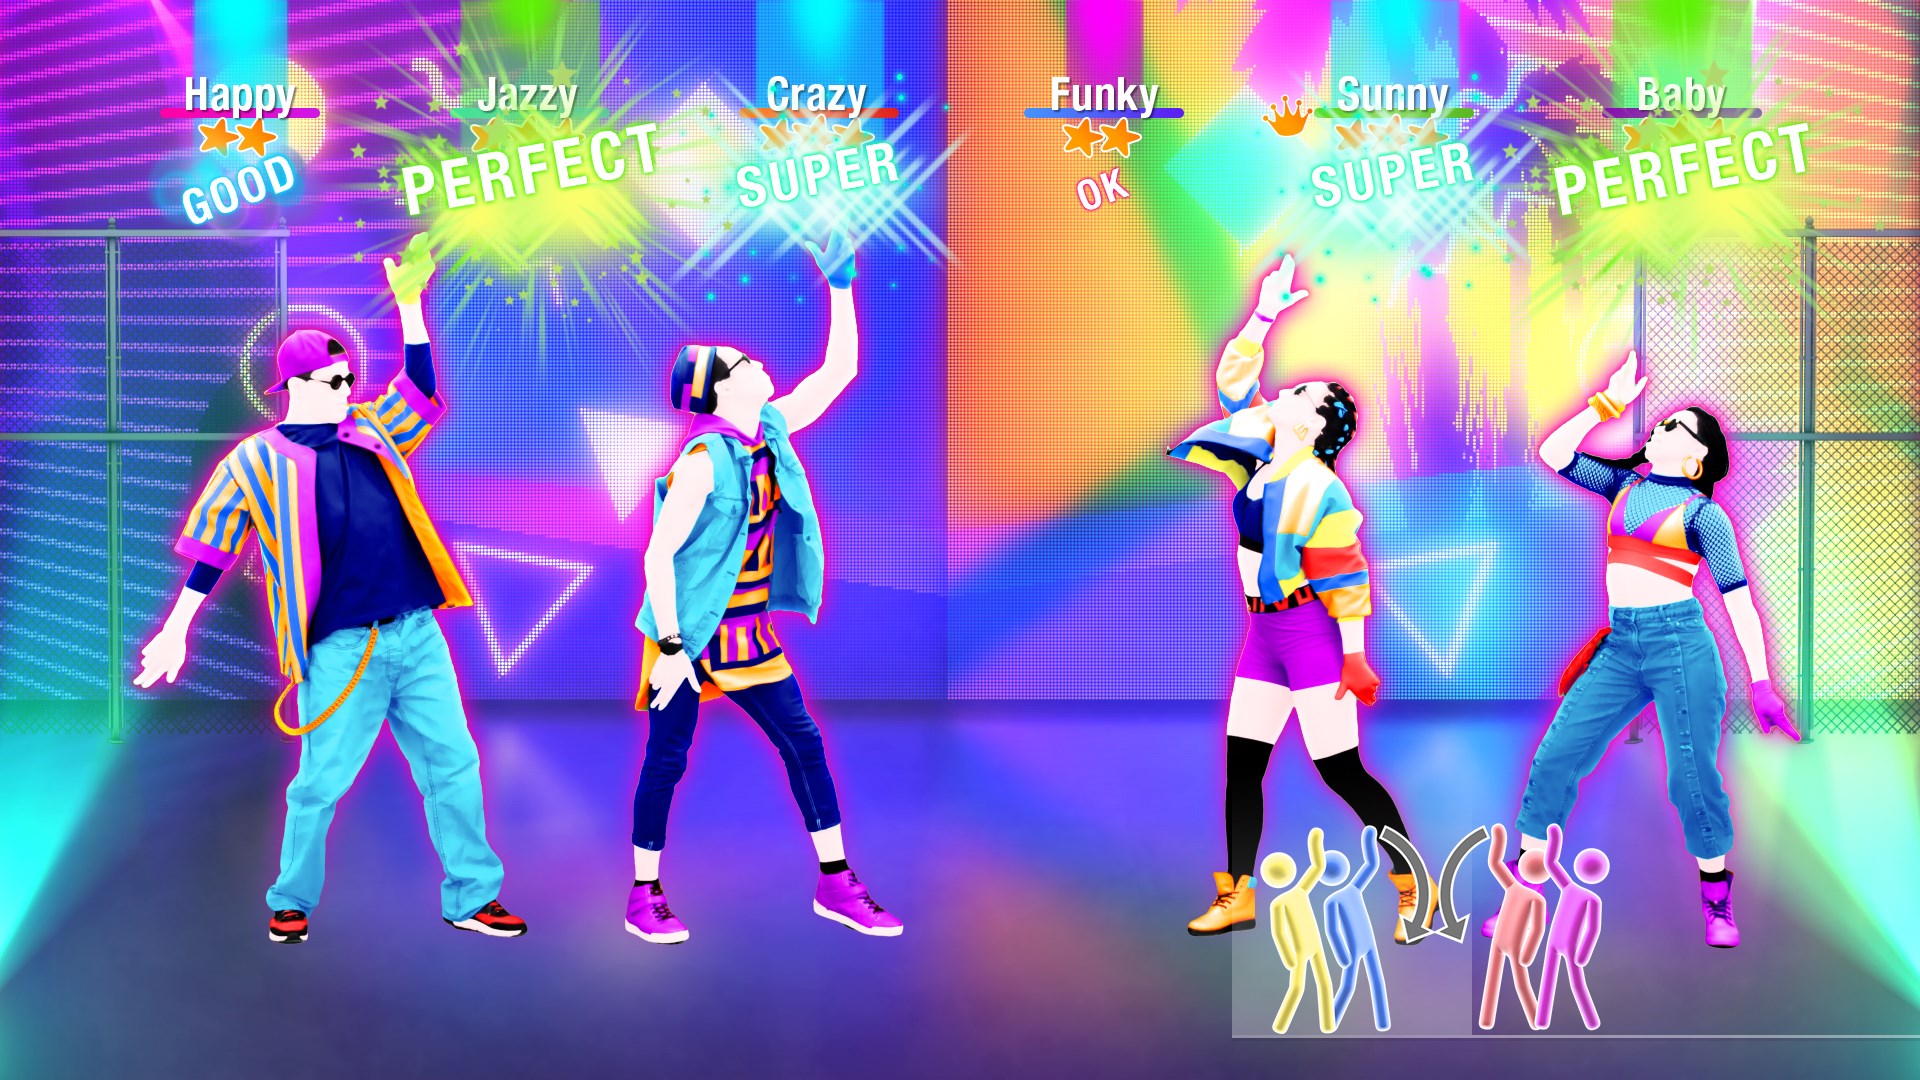 just dance 2019 for xbox one